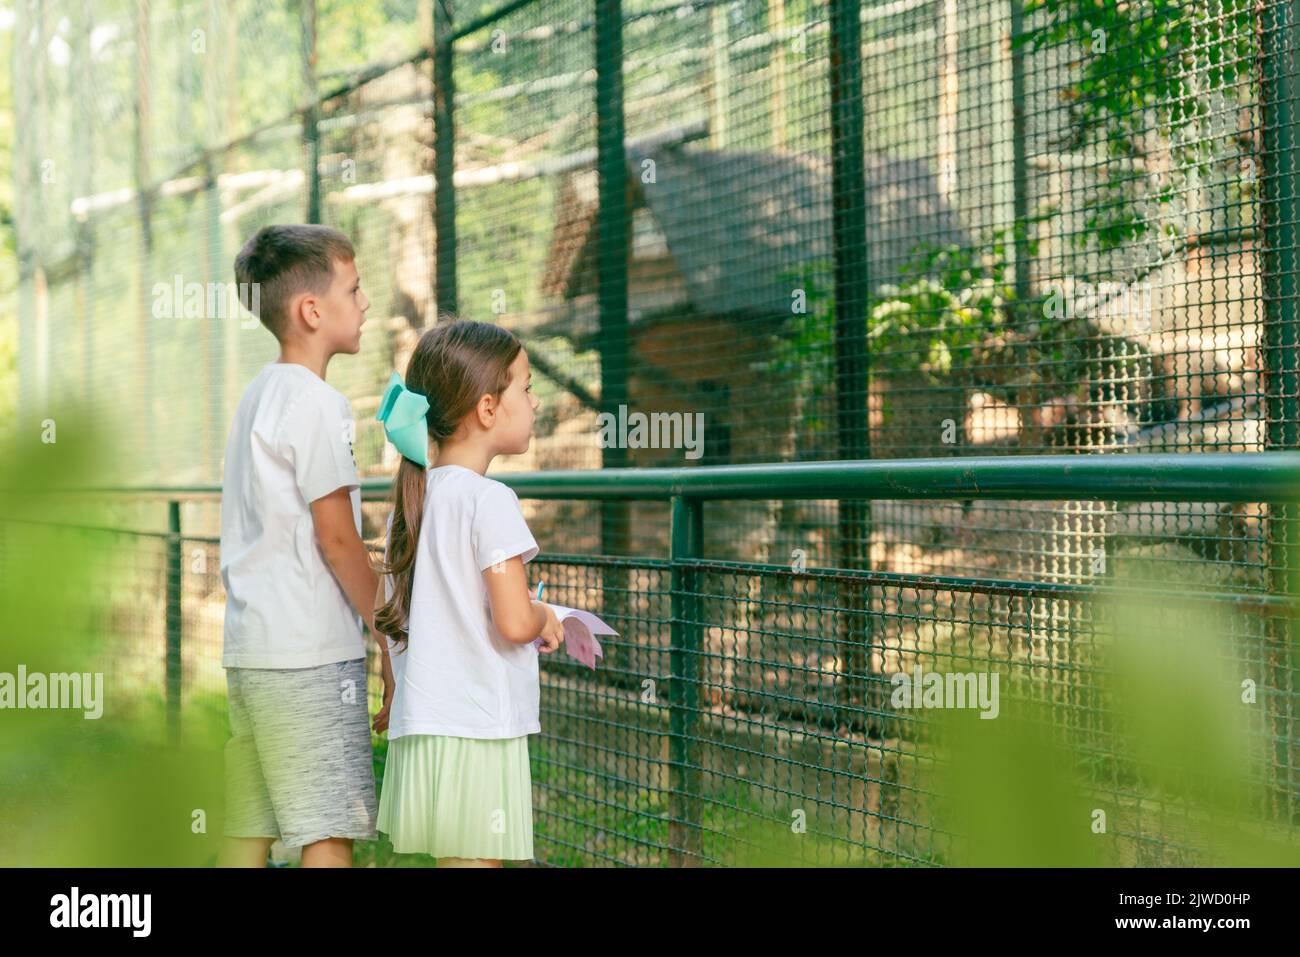 Children observe a cage with birds in the zoo. The girl is holding a notebook and taking notes Stock Photo